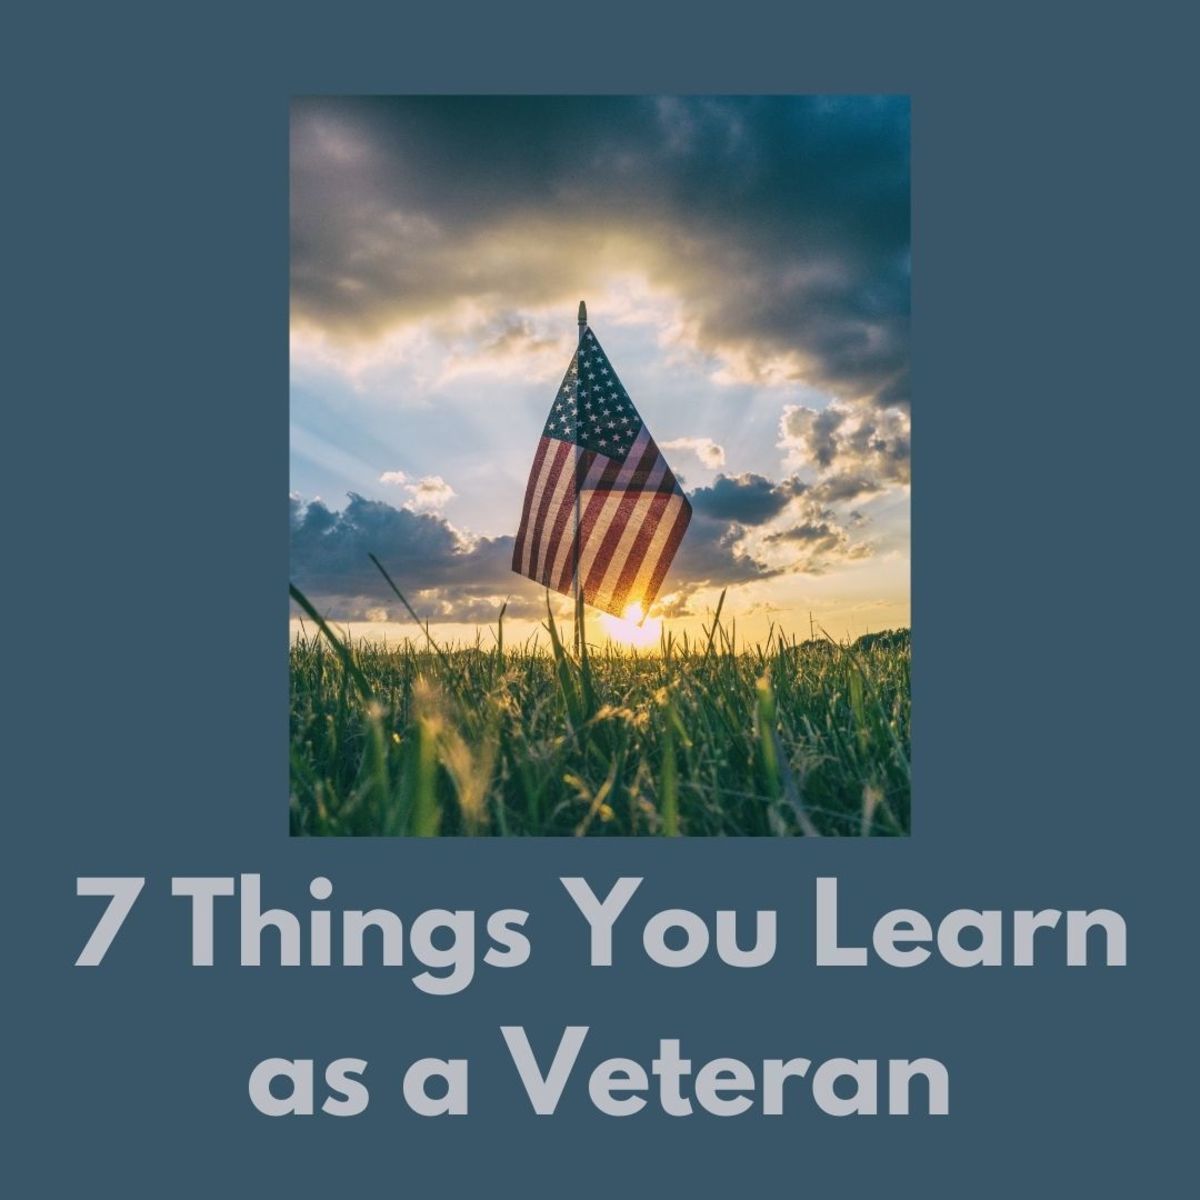 Life After the Army: 7 Things You Learn as a Veteran